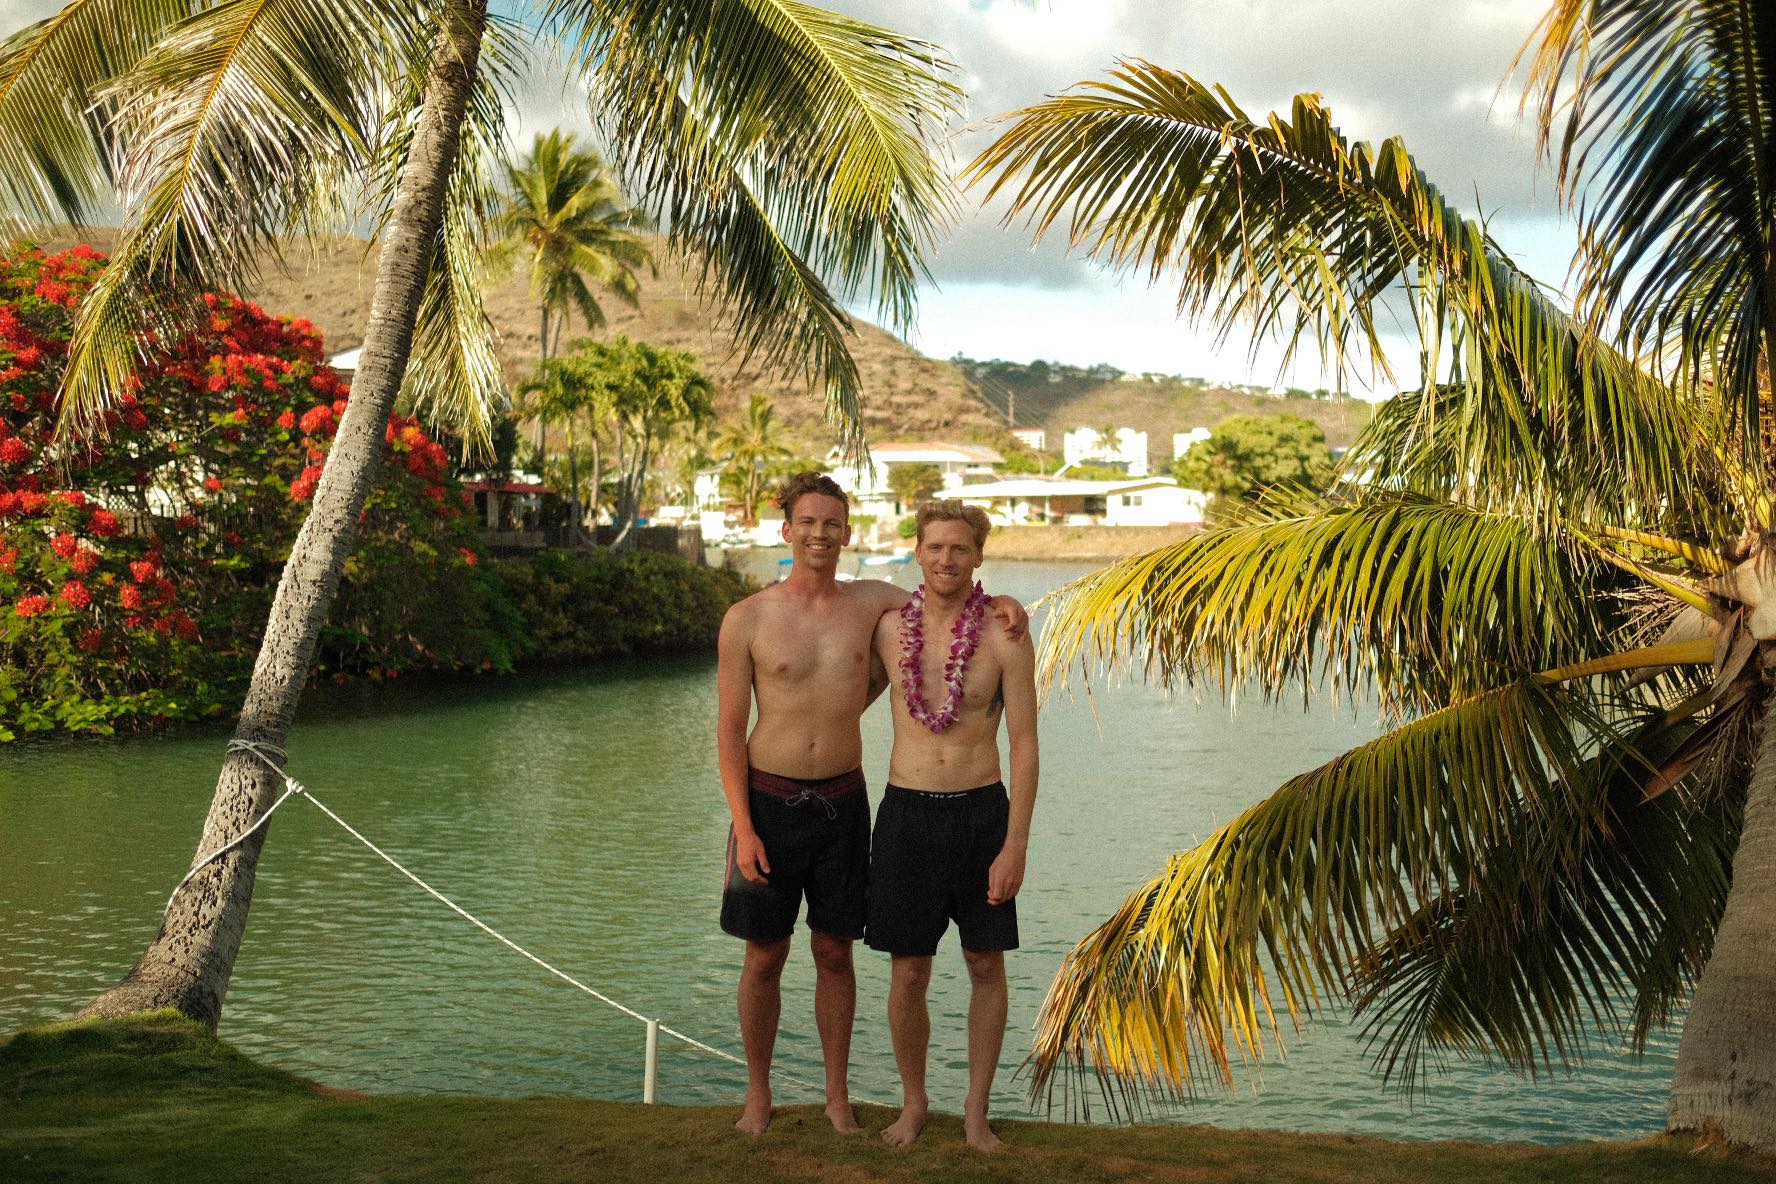 Sam Tolhurst and Brett Connellan are standing on an beach. They have their arms around each others shoulders smilinng, and Brett is wearing a lei around his neck.